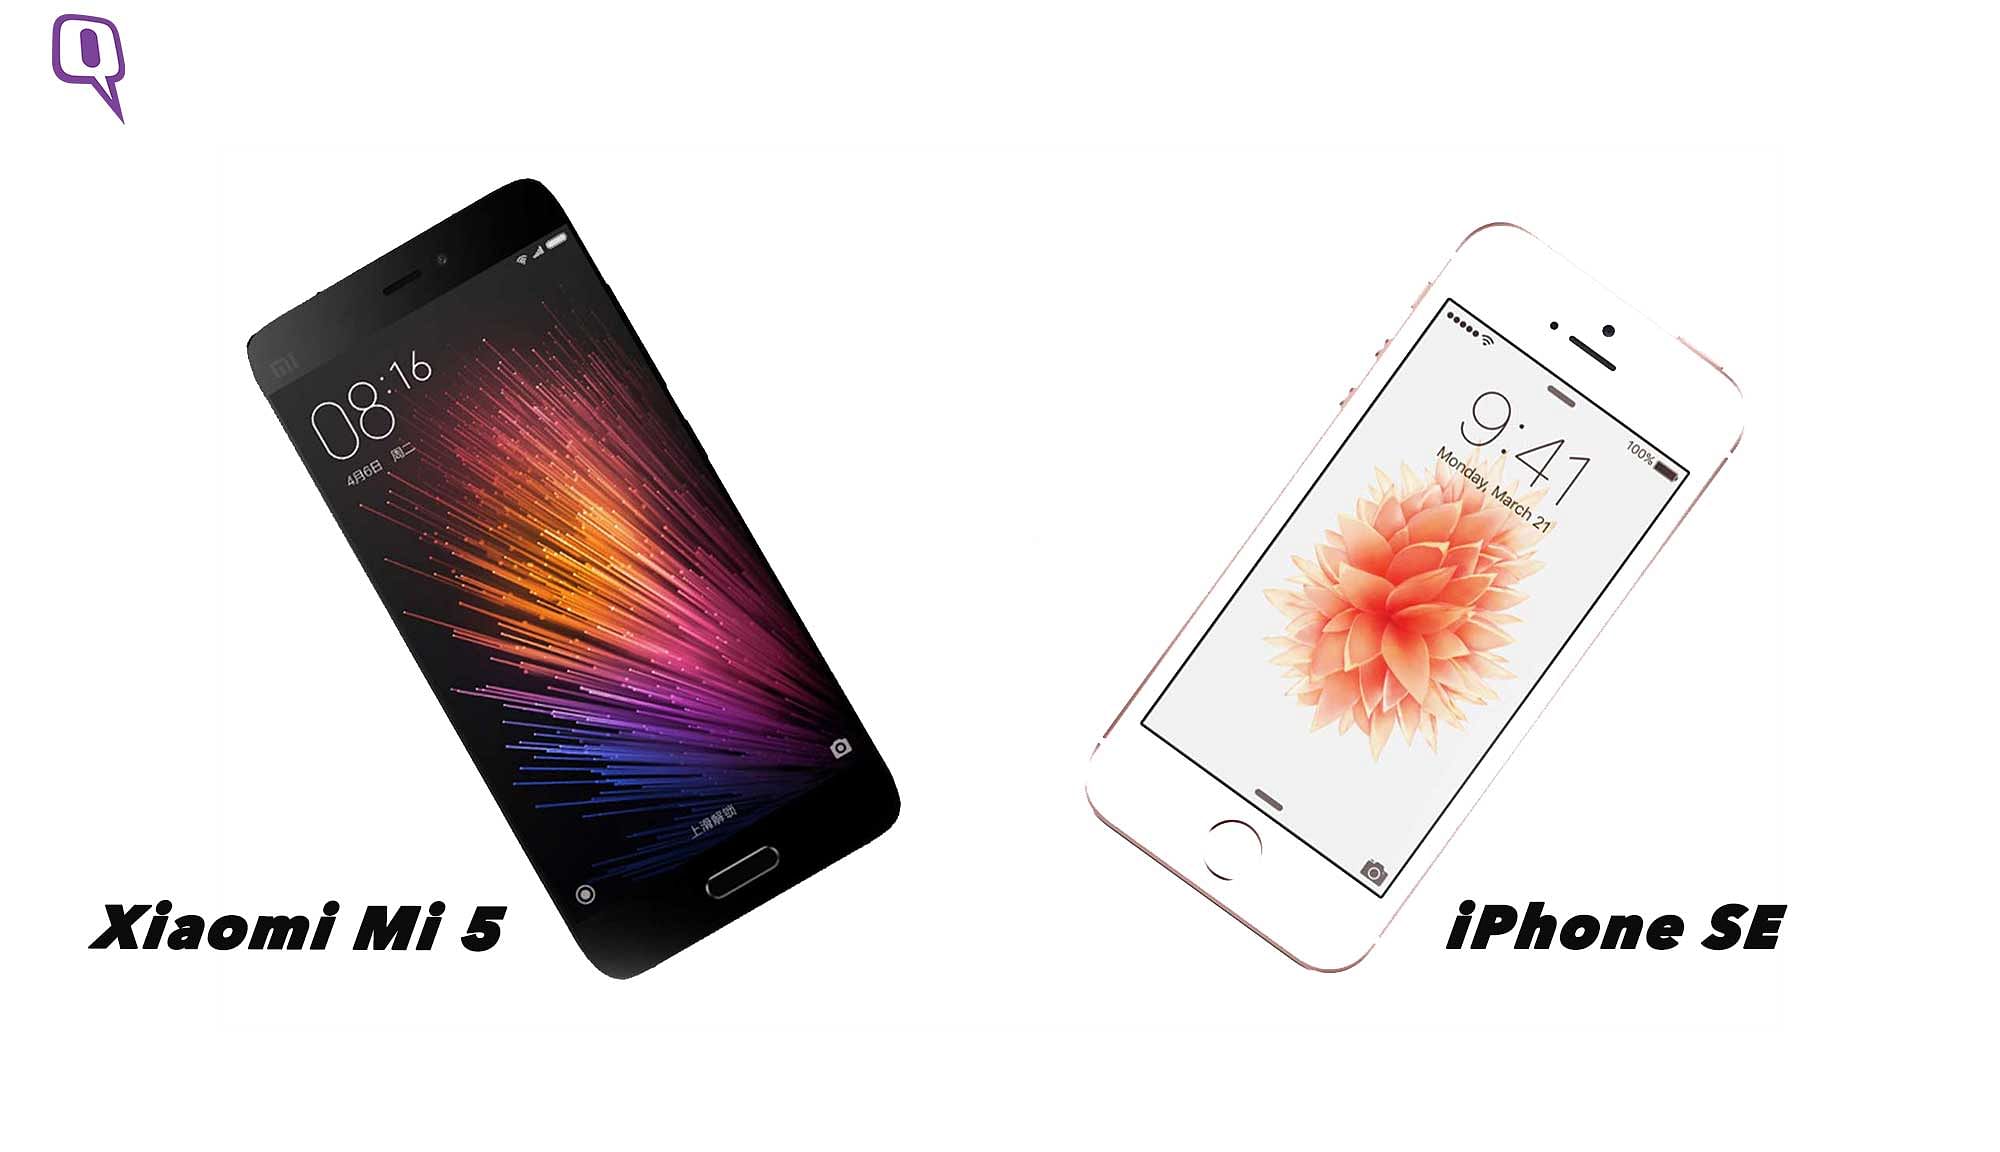 We think that both Xiaomi Mi 5 and Apple iPhone SE are expensive. (Photo: <b>The Quint</b>)